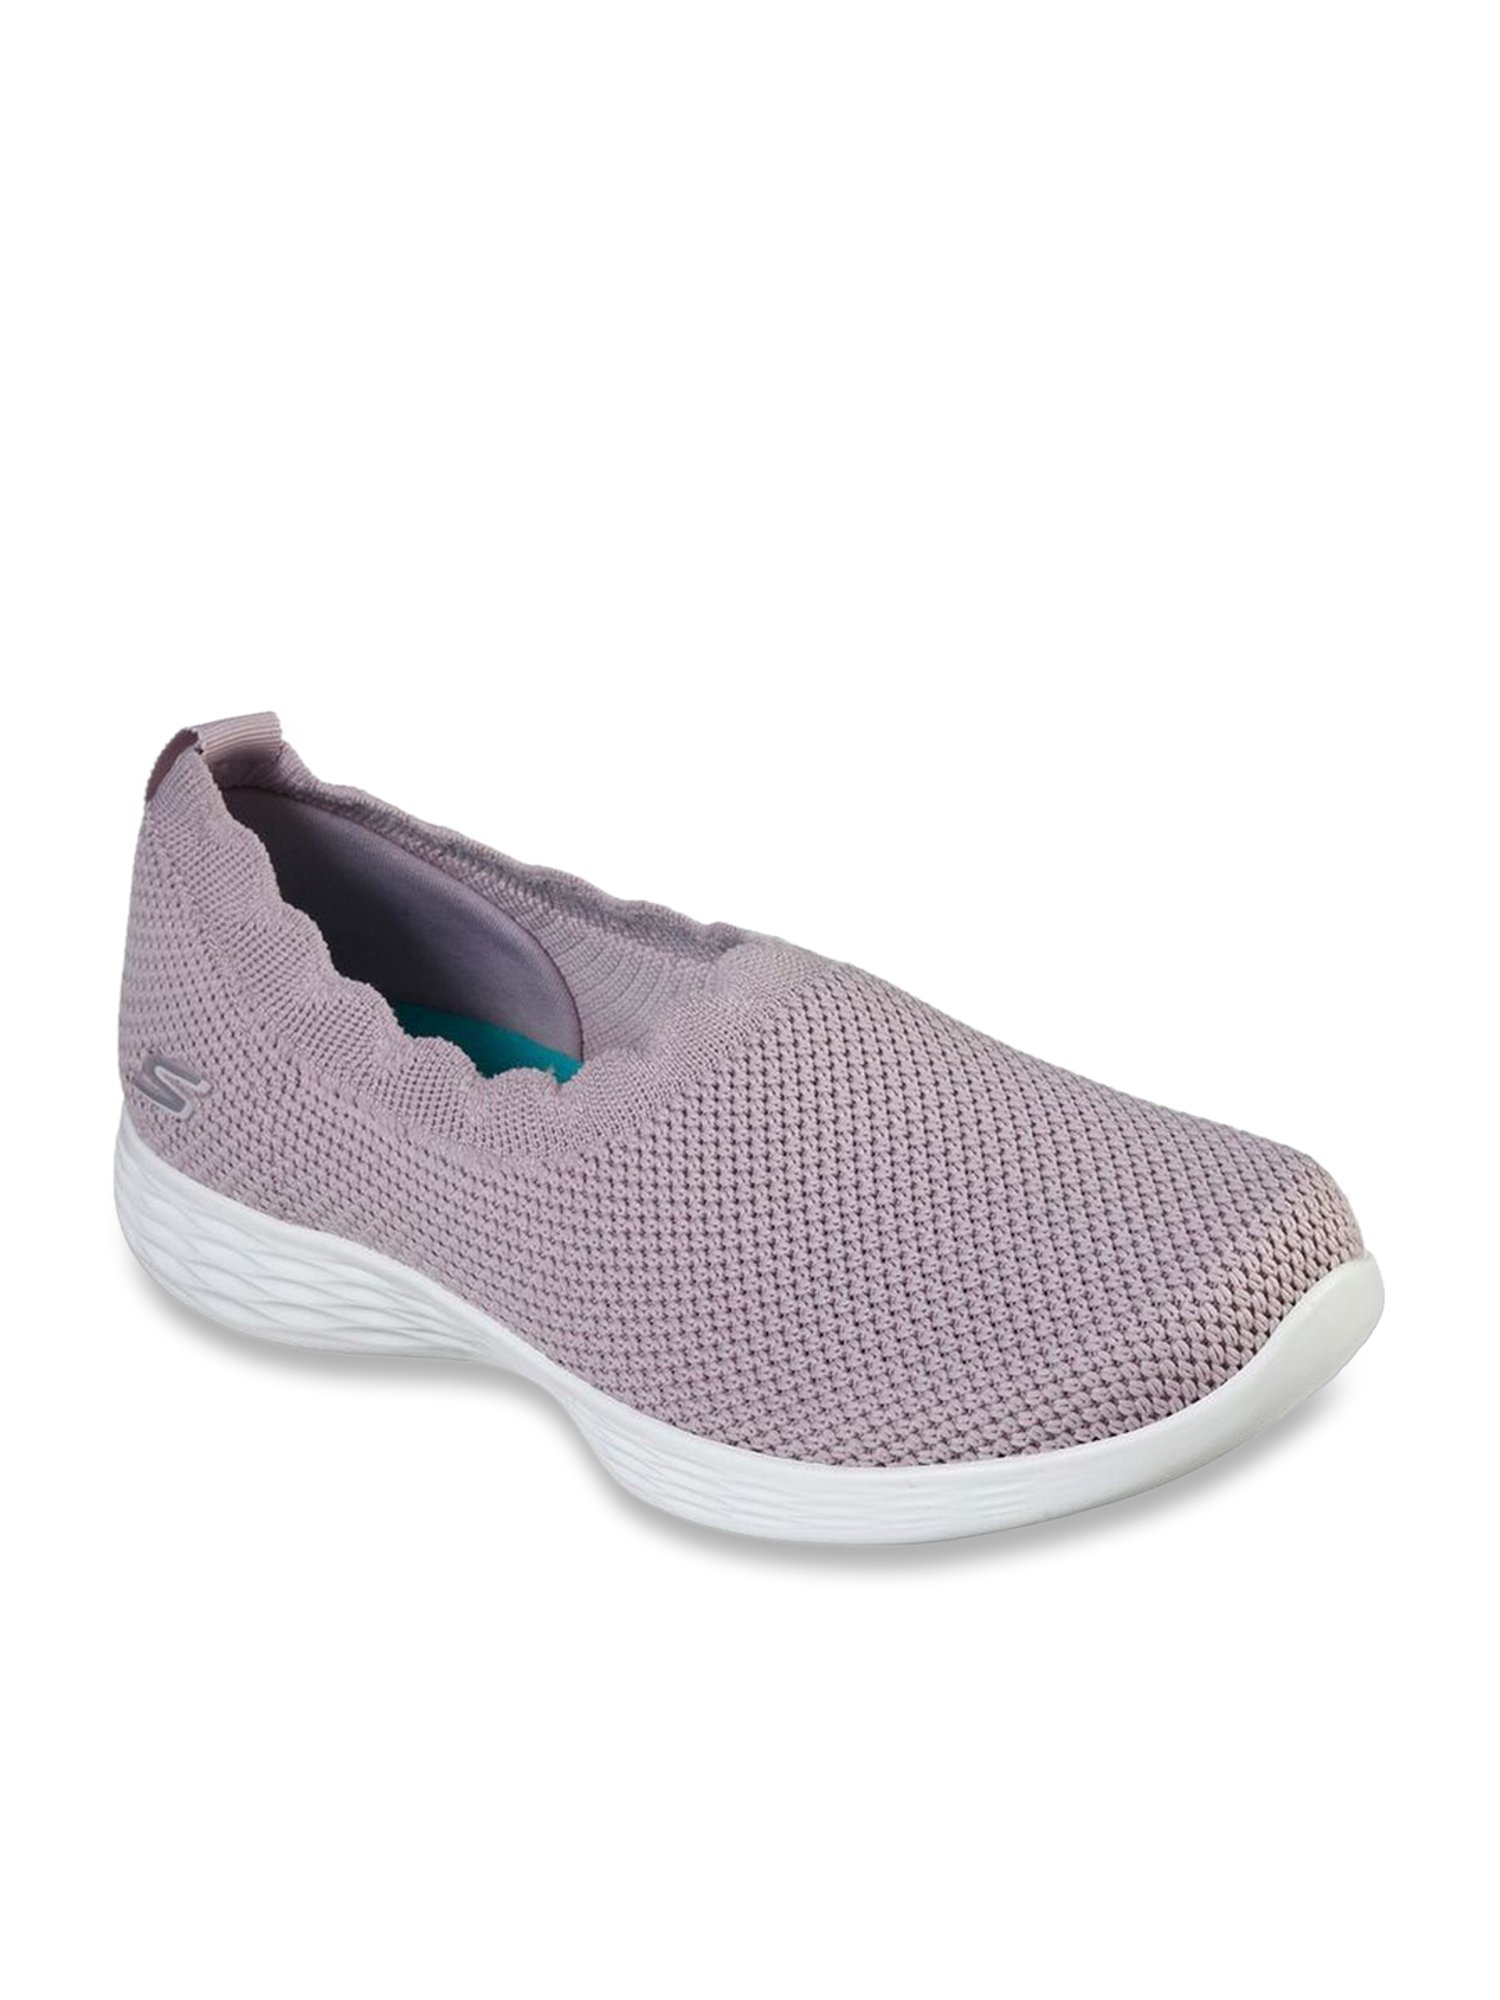 Buy Skechers Women's D'LUX COMFORT GLOW TIME Peach Sneakers for Women at  Best Price @ Tata CLiQ